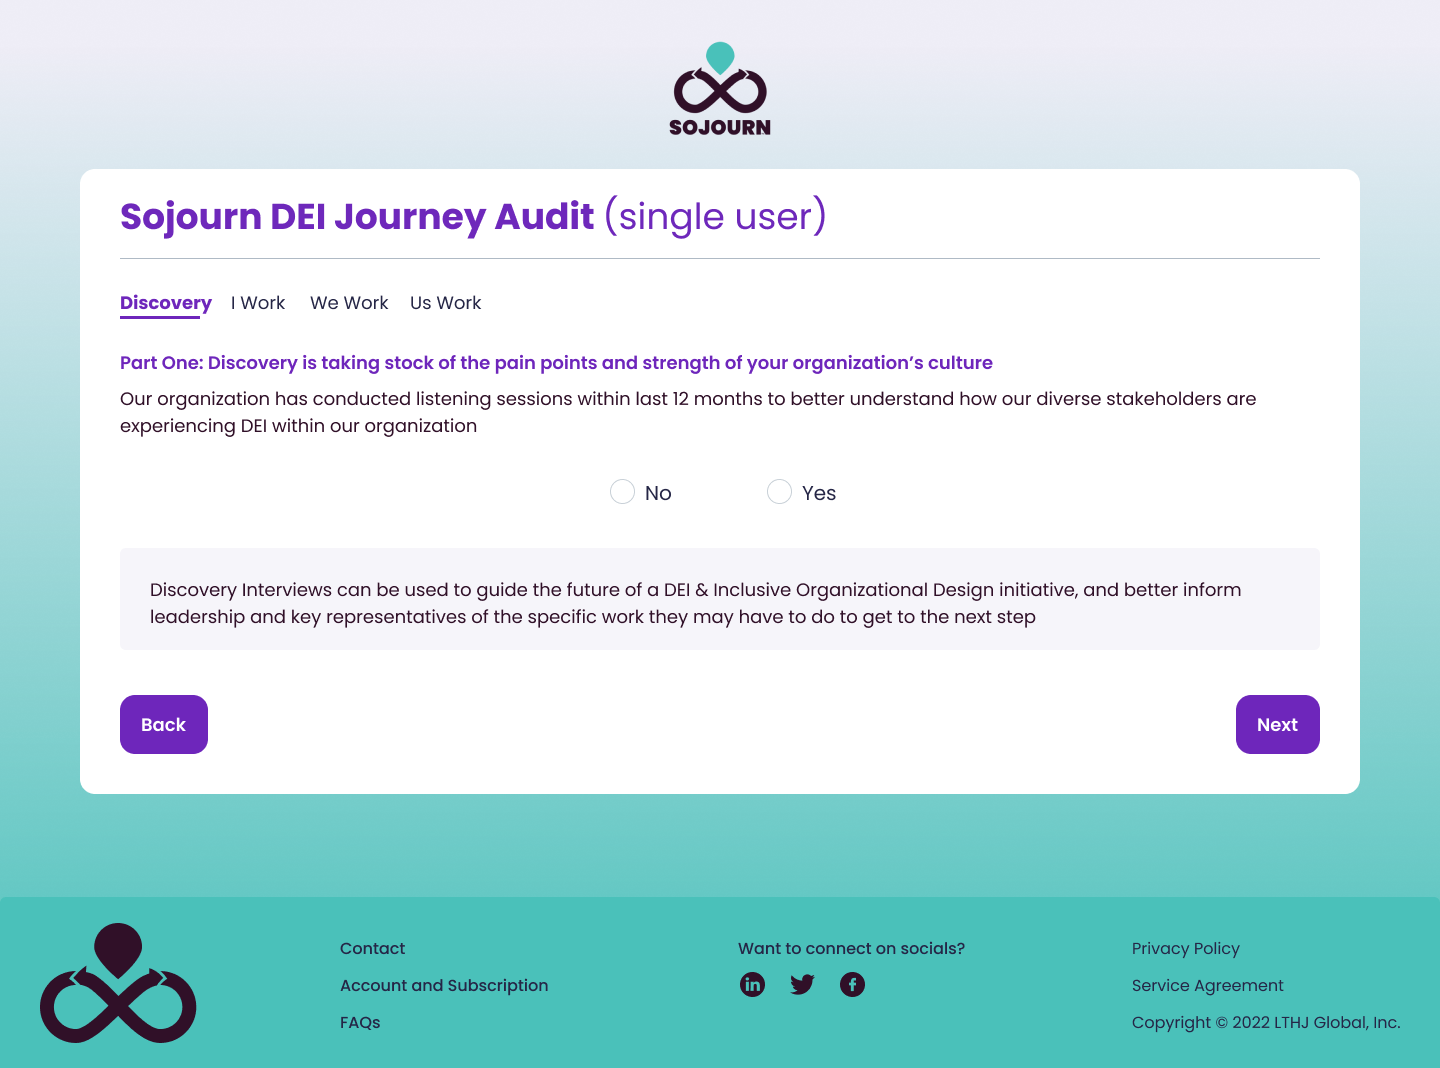 An image from the Sojourn DEI Journey Audit single user